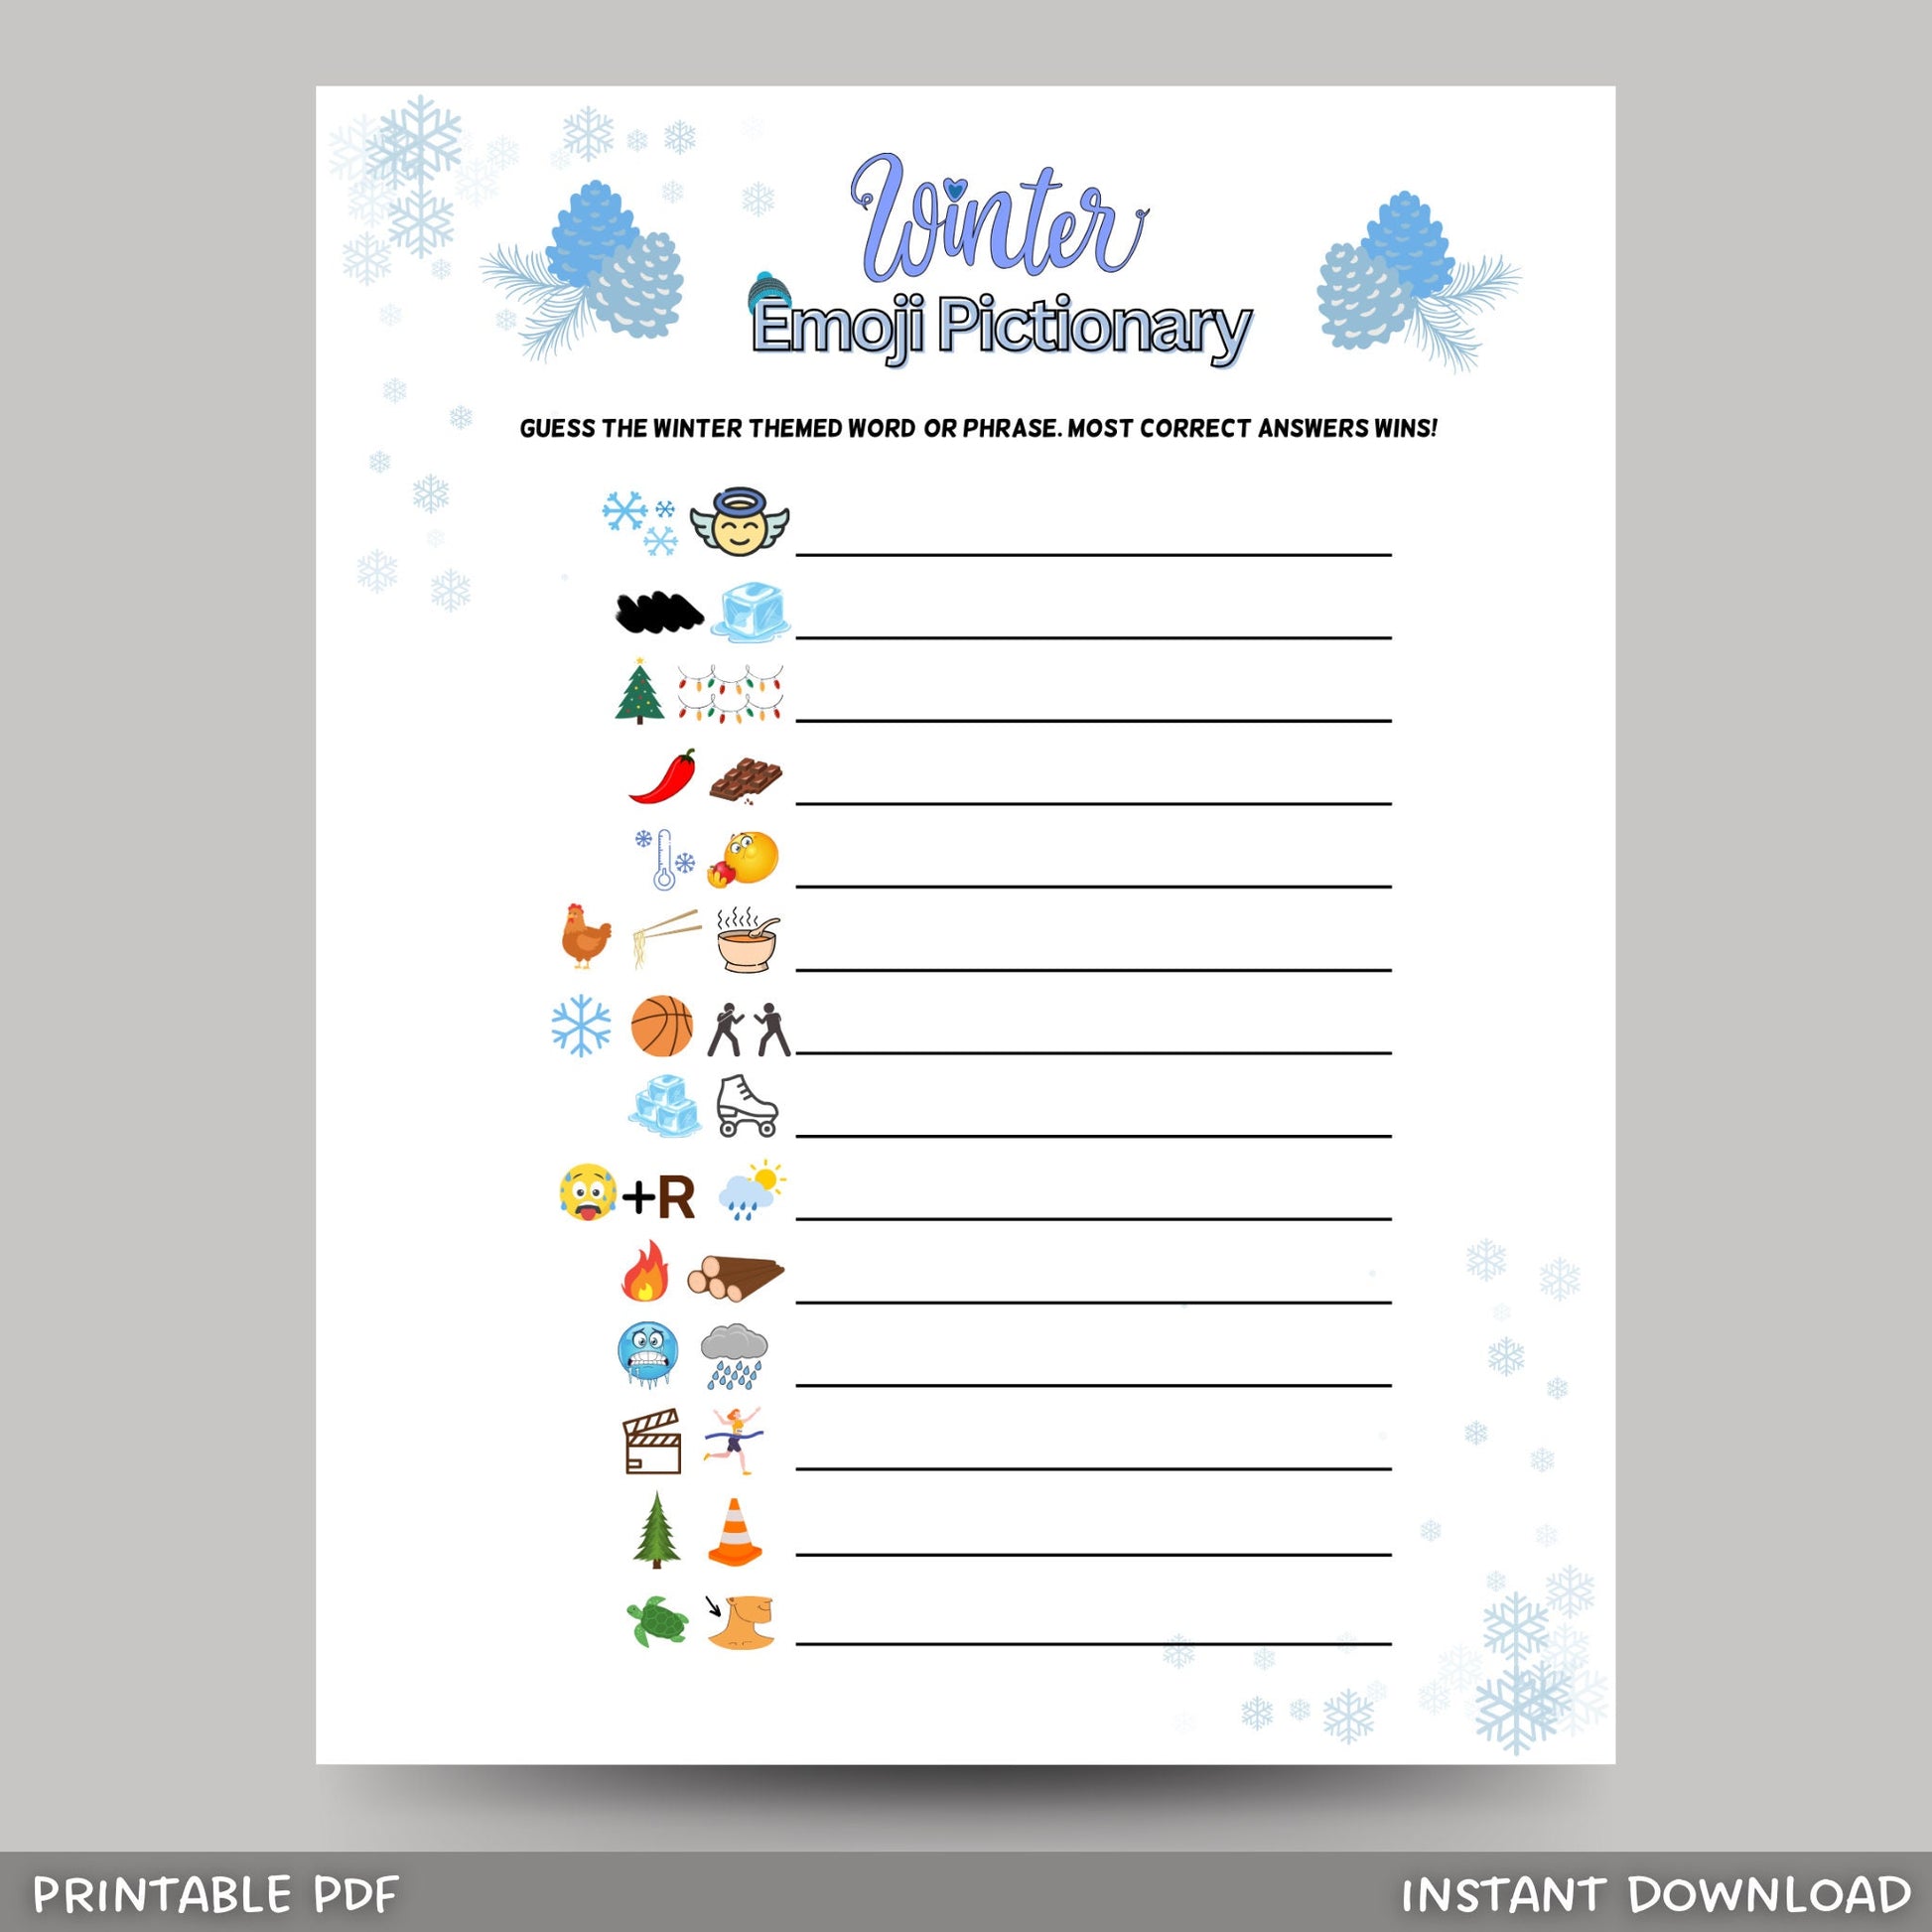 Winter Emoji Pictionary Game Printable, Holiday Party Games, Fun Winter Game, Winter Family Activity, For Kids & Adults, Christmas New Years